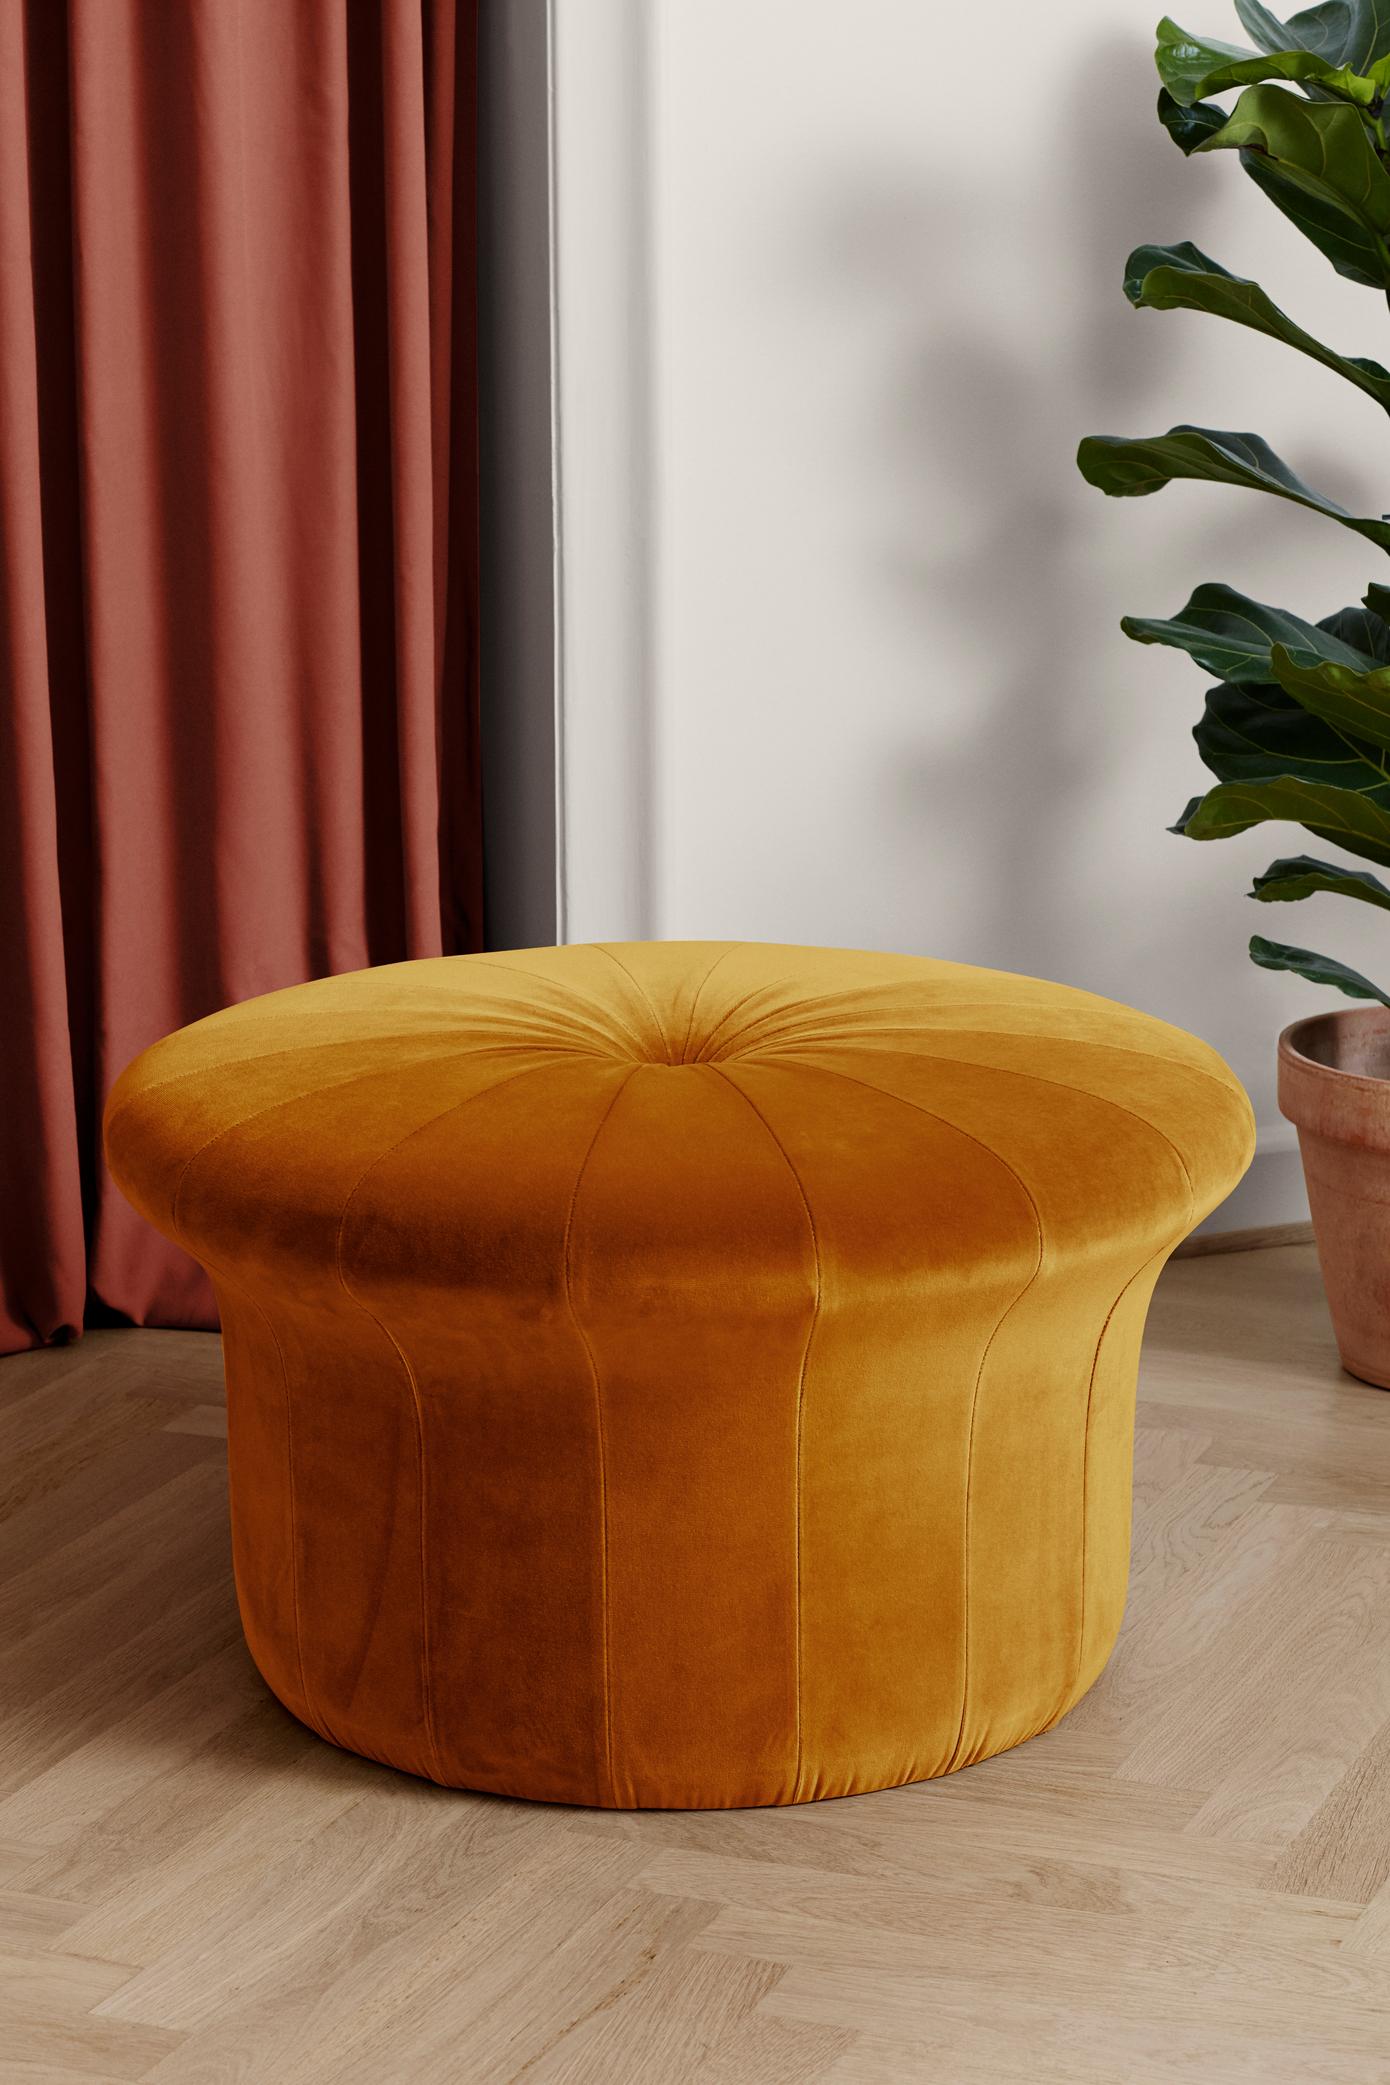 Grace Amber pouf by Warm Nordic
Dimensions: D77 x H 45 cm
Material: Textile upholstery, Foam, Wood.
Weight: 15.5 kg
Also available in different colours and finishes. 

A luxurious pouffe in a sophisticated, inviting idiom, created by the